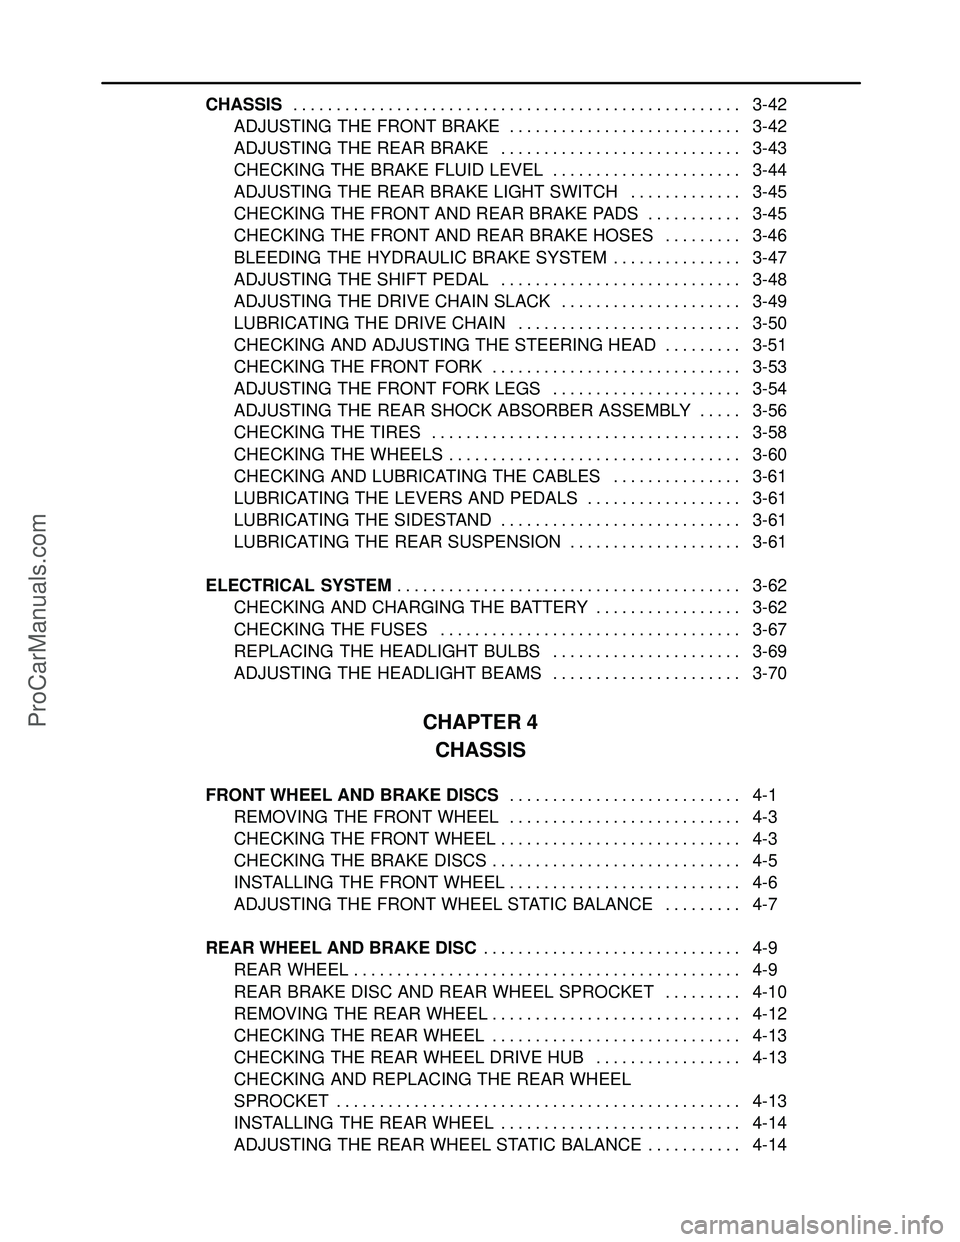 YAMAHA YZF-R1SC 2004  Service Manual CHASSIS3-42 . . . . . . . . . . . . . . . . . . . . . . . . . . . . . . . . . . . . . . . . . . . . . . . . . . . . 
ADJUSTING THE FRONT BRAKE 3-42. . . . . . . . . . . . . . . . . . . . . . . . . . .